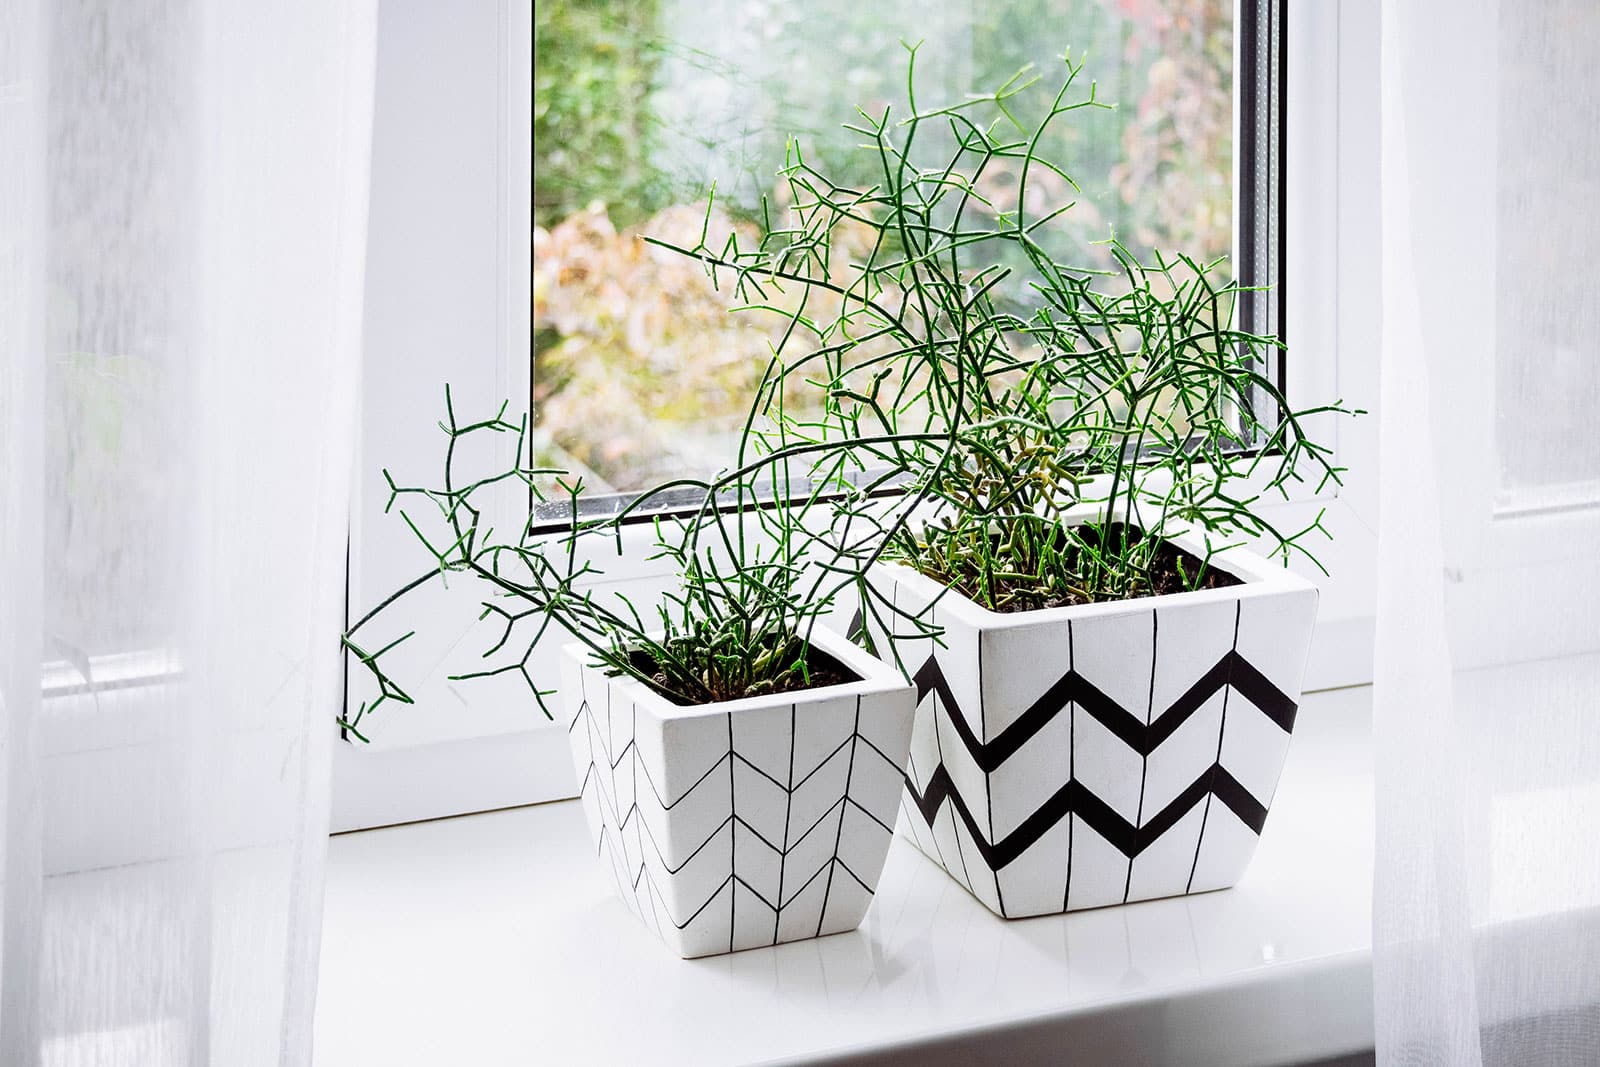 Two small Rhipsalis plants in graphic black-and-white pots sitting on a sunny window sill